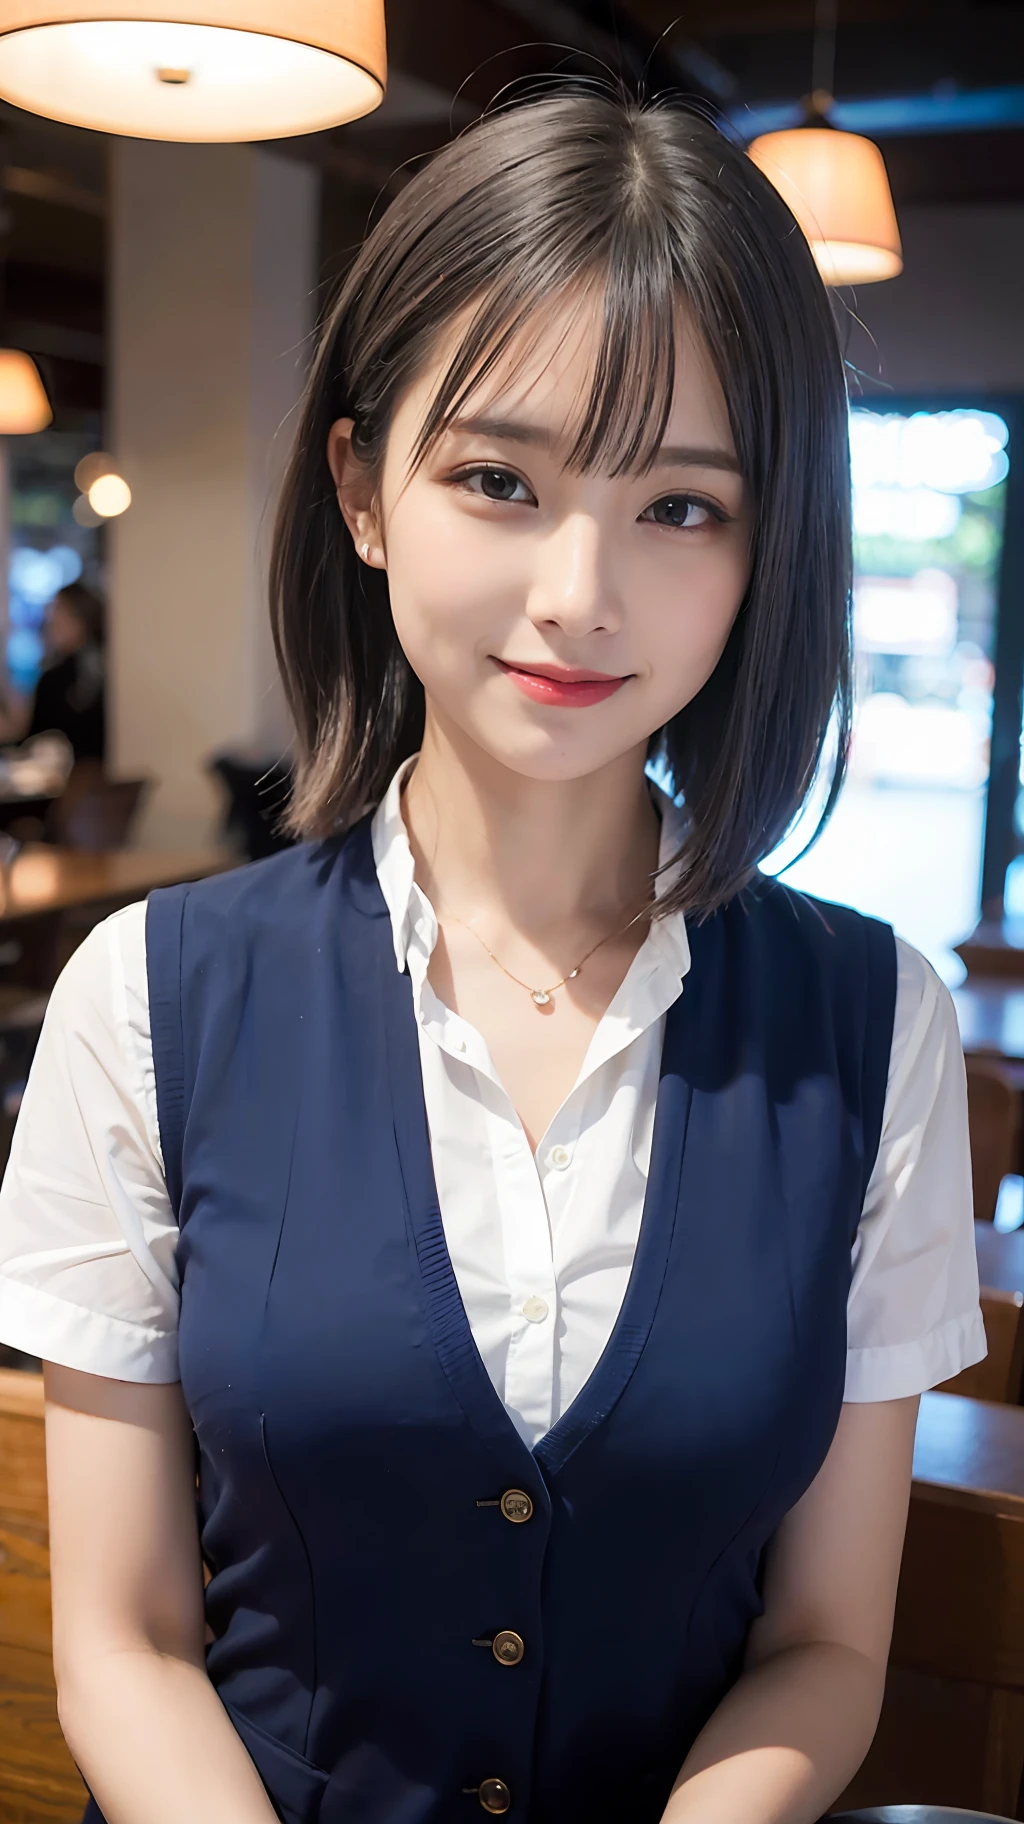 (((Medium hair))), Top Quality, 8K, HDR, Hi-Res, Absurdity: 1.2, Photography, (RAW Photos: 1.2), (Photorealistic: 1.4), (Masterpiece: 1.3), (Complex Details: 1.2), 1 Girl, Solo, Japan girls, Delicate and beautiful details, (Detailed eyes), (Detailed facial features), , (Small breasts))), Toned Skin, ( looking_at_viewer), from_front, (Skinny), (Best Quality: 1.4), (Ultra High Definition: 1.2), Cinemalite, (Extreme Detail Illustration), (Lip Gloss, Best Quality, Ultra High Resolution, Depth of Field, Caustics, Broad Lighting, Natural Shading, 85mm, f / 1.4, ISO 200, 1/160 sec: 0.75), 1 girl, solo, ((blue vest))) smile, uniform, necklace, Fashionable café: 1.3, black neat and clean clothes, Nogizaka idol, gravure idol, beauty